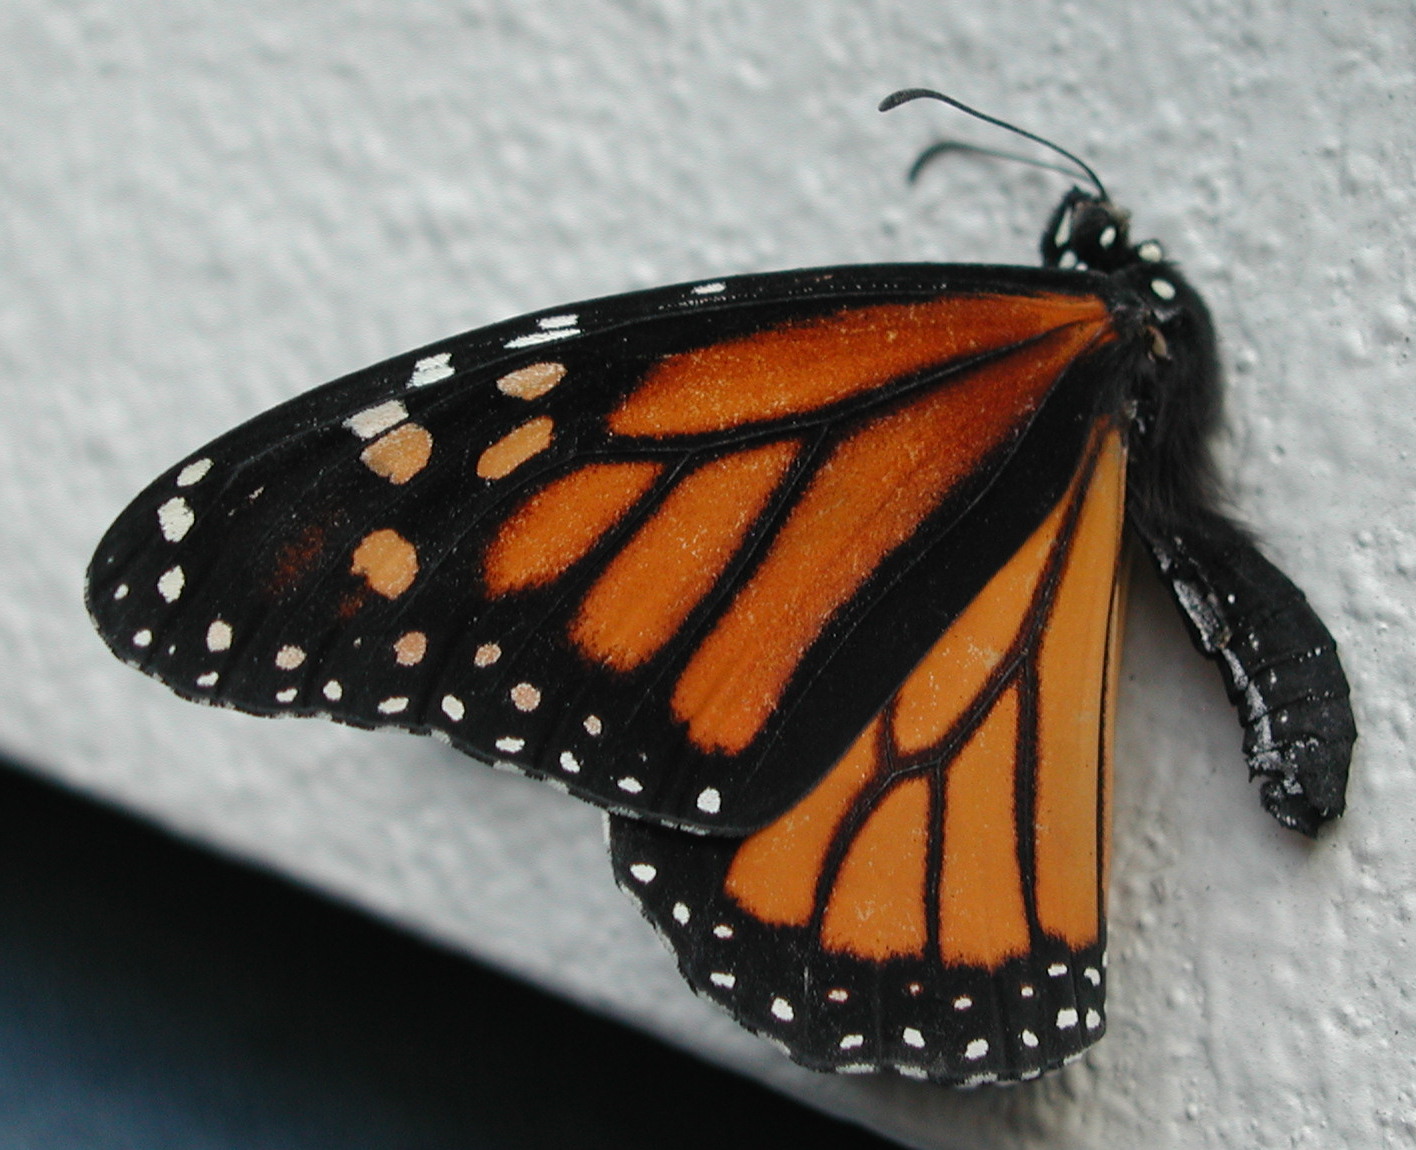 Gallery Photos of "Butterfly Side View" .